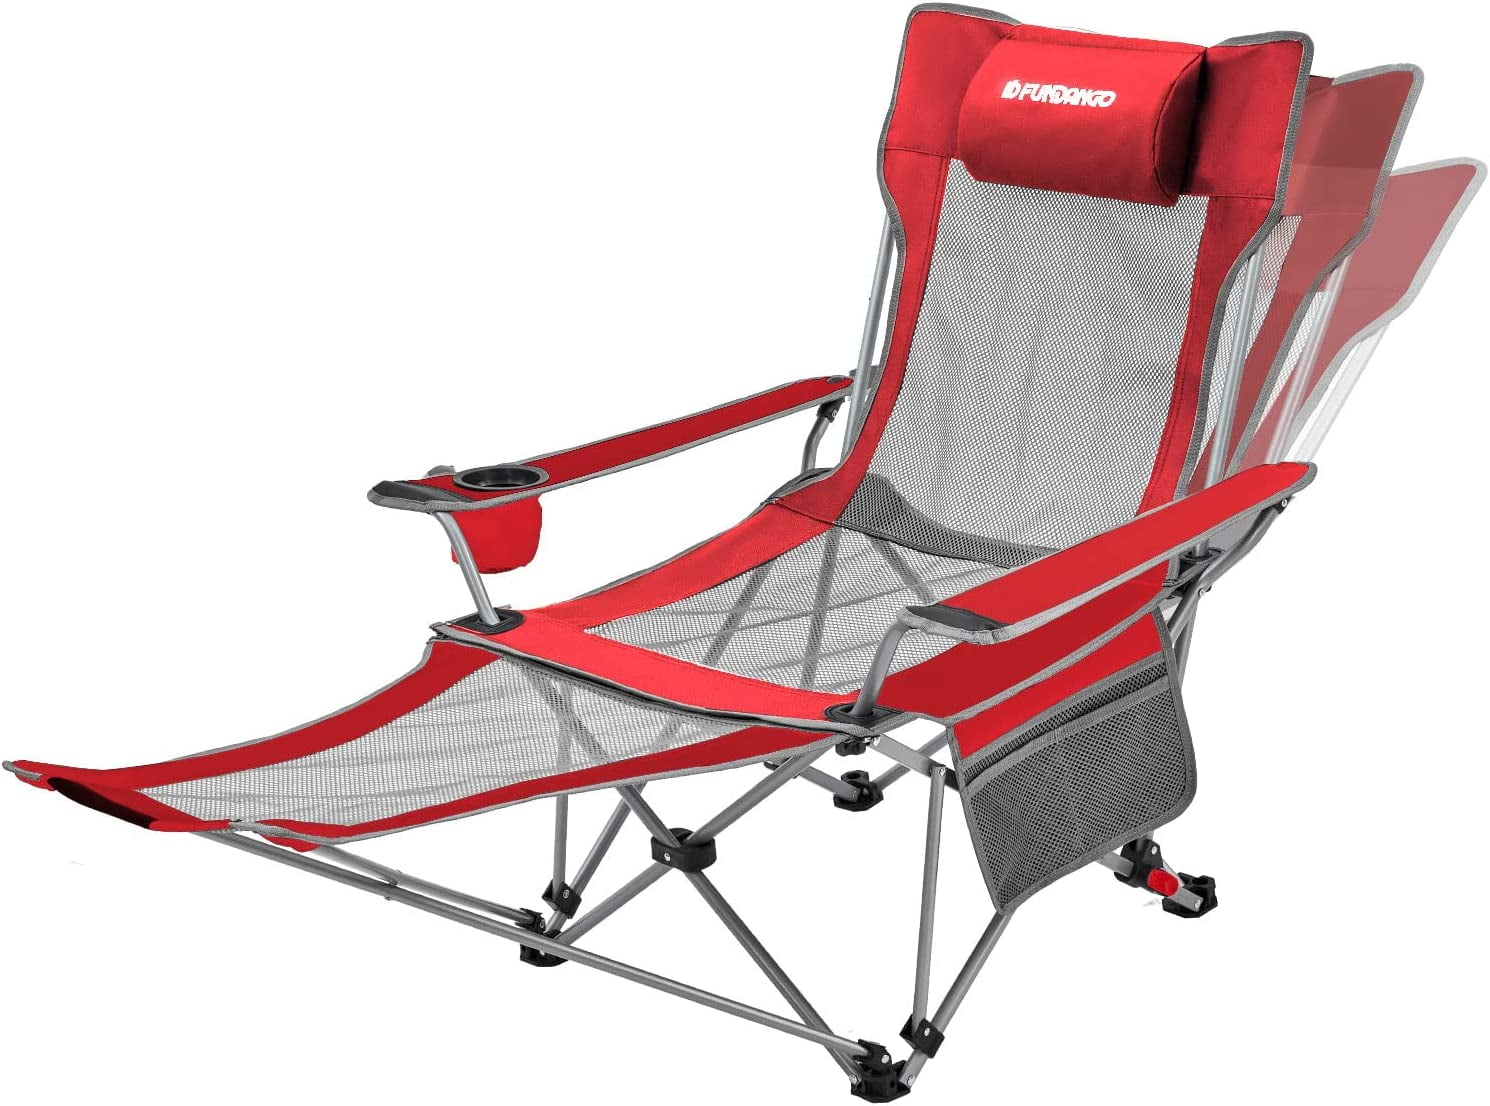  NUOWN Portable Chair Camping Chair Adjustable Height